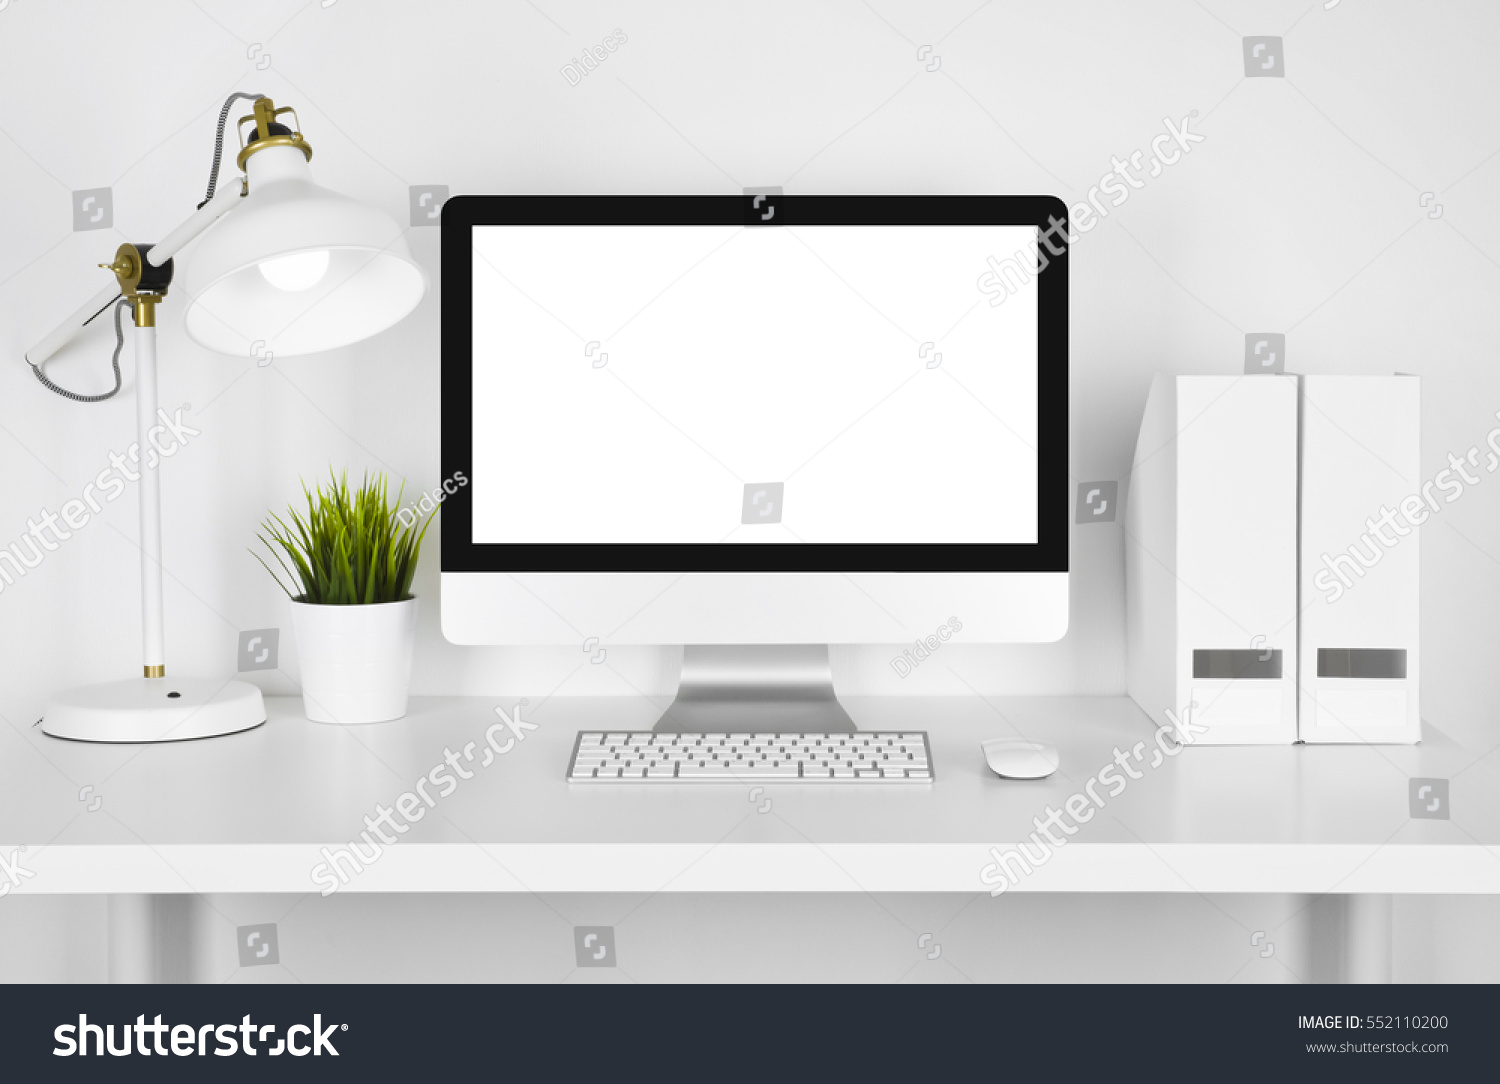 Blank screen computer, lamp and table folder over white background #552110200